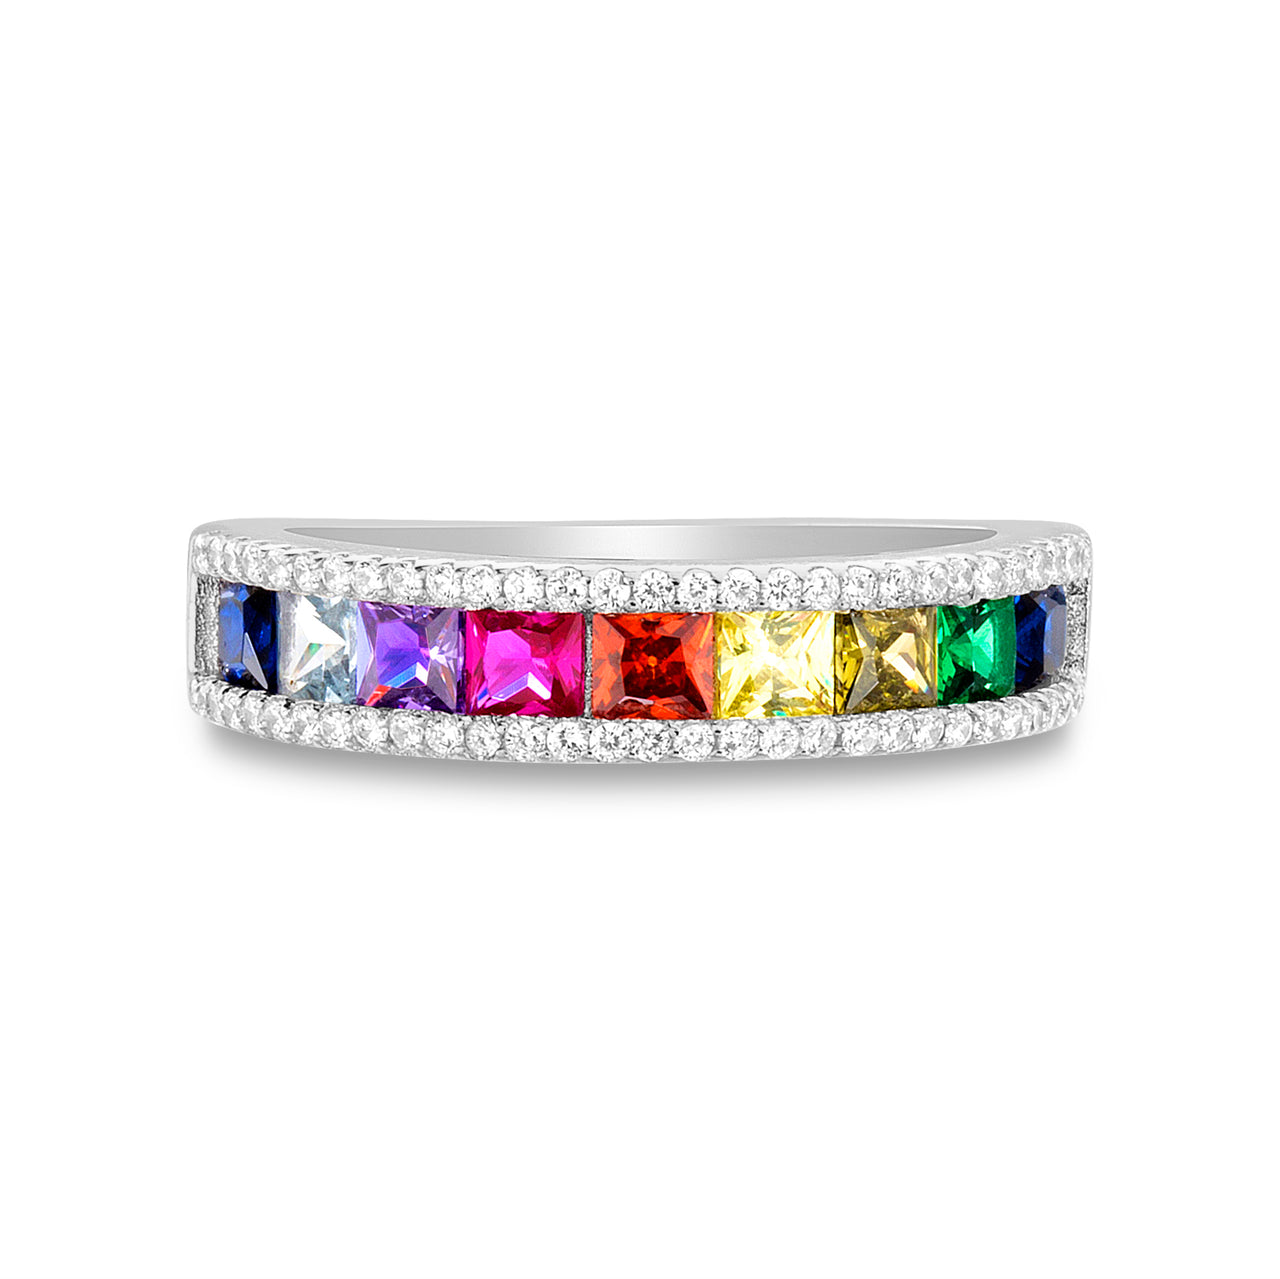 Lesa Michele Rainbow Princess Cut Cubic Zirconia Channel Set Band Ring in Rhodium Plated Sterling Silver